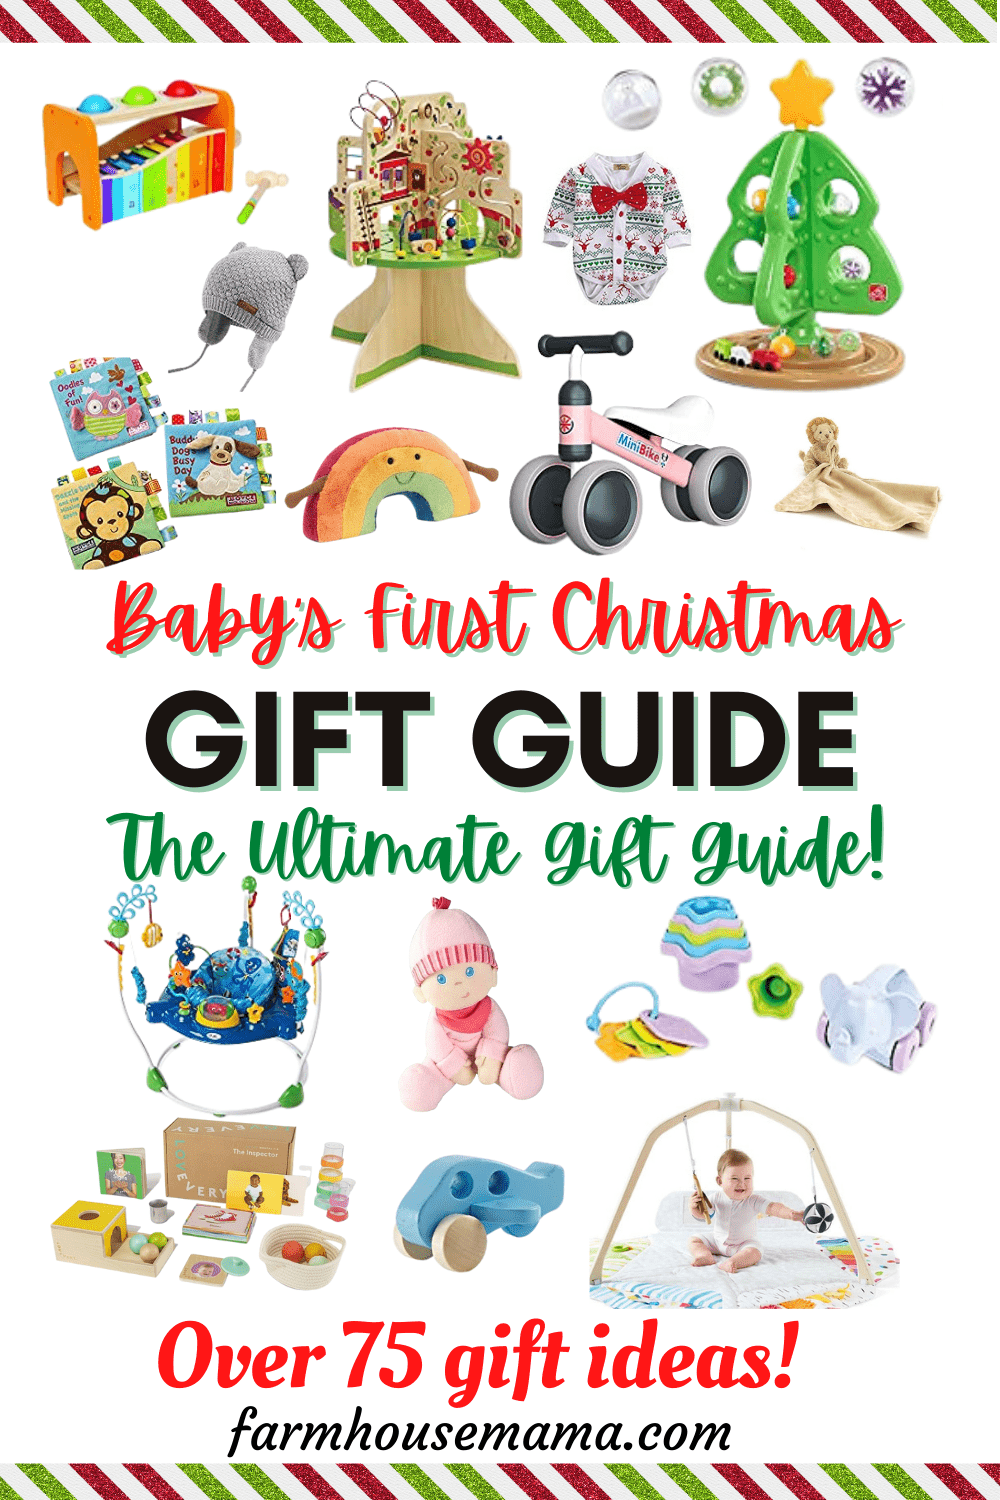 baby's first christmas gifts presents toys baby essentials the ultimate gift guide toy ideas gift ideas christmas outfits christmas stocking stuffers for baby